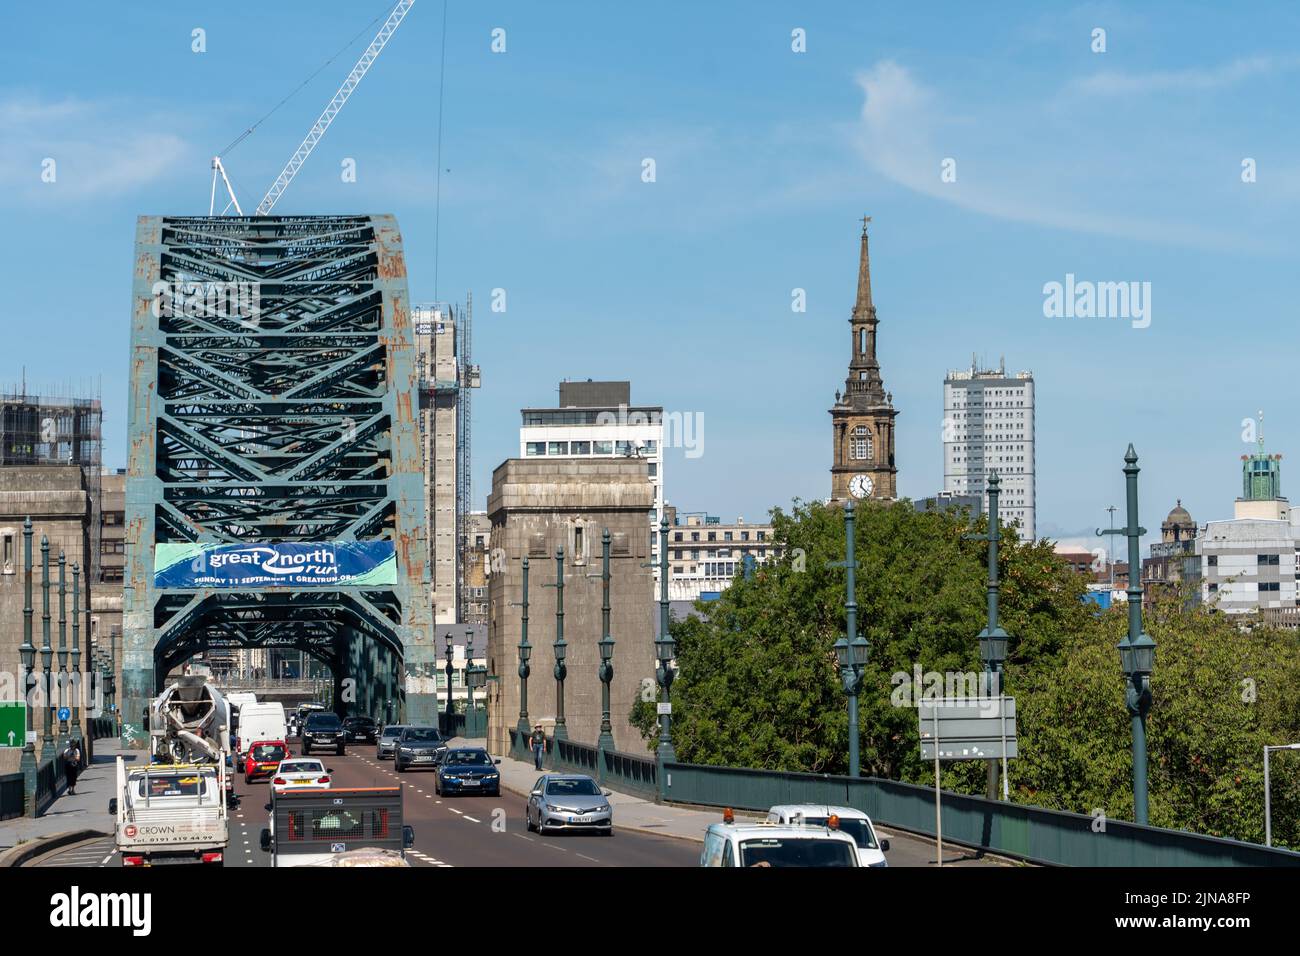 Cityscape view of the Tyne Bridge crossing from Gateshead to Newcastle upon Tyne, UK, including the spire of the St Mary' visitor centre. Stock Photo